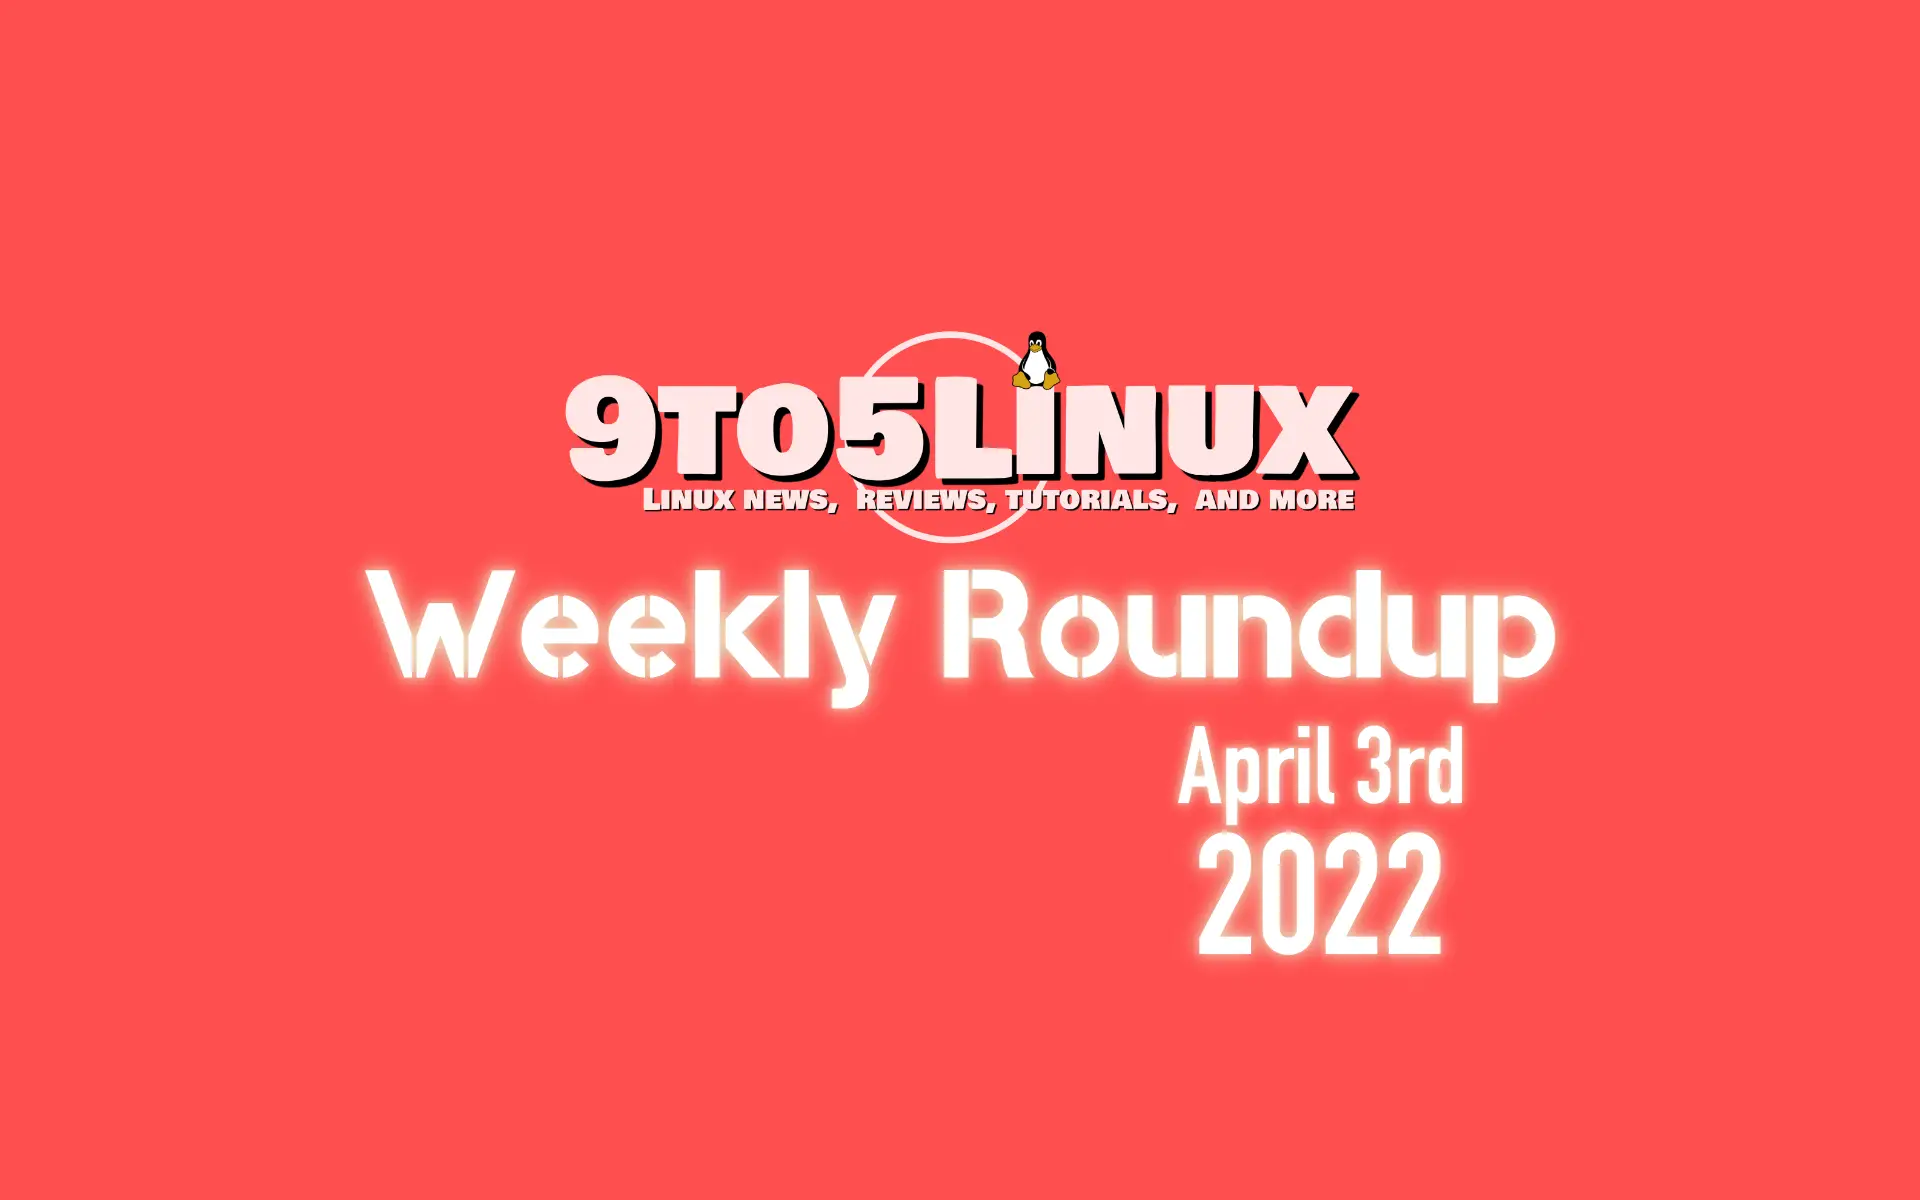 9to5Linux Weekly Roundup: April 3rd, 2022